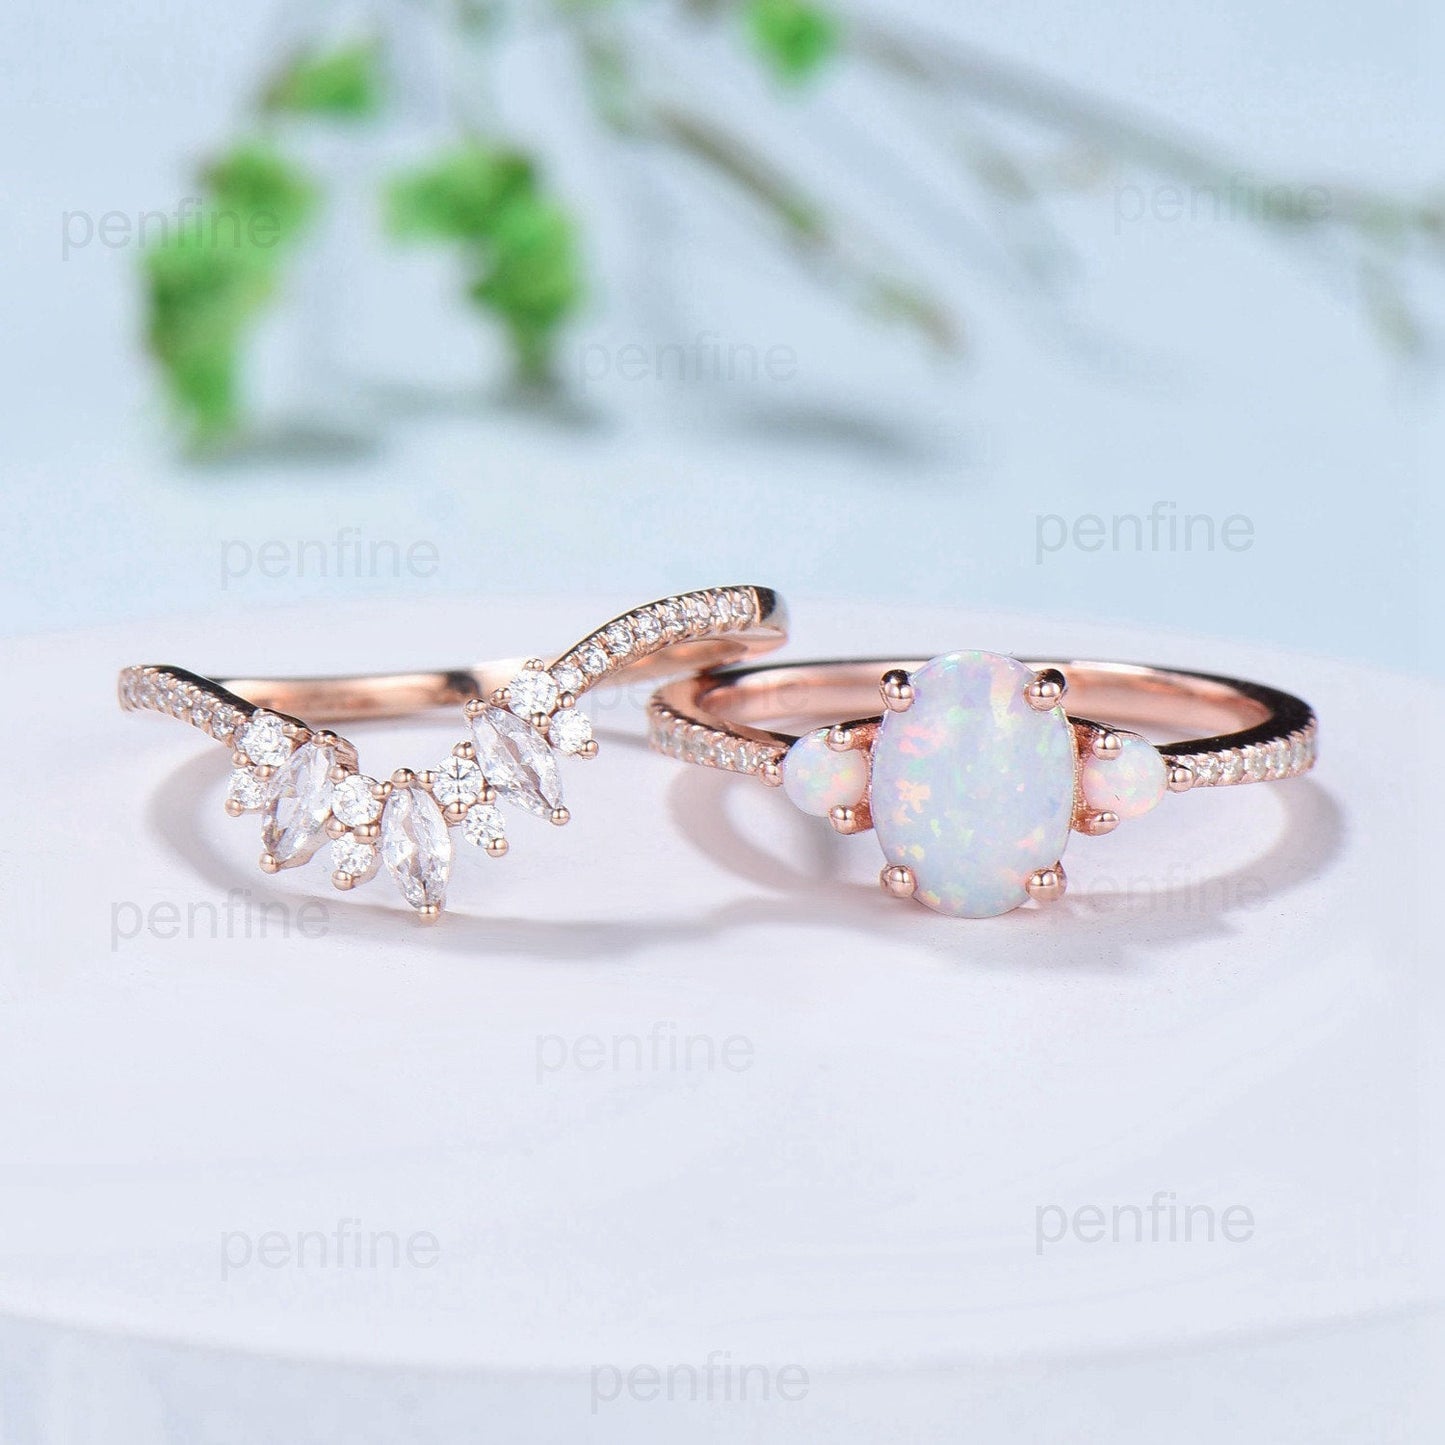 Fire opal engagement ring Set oval cut white opal wedding set three stone crown moissanite stacking band art deco engagement ring rose gold - PENFINE